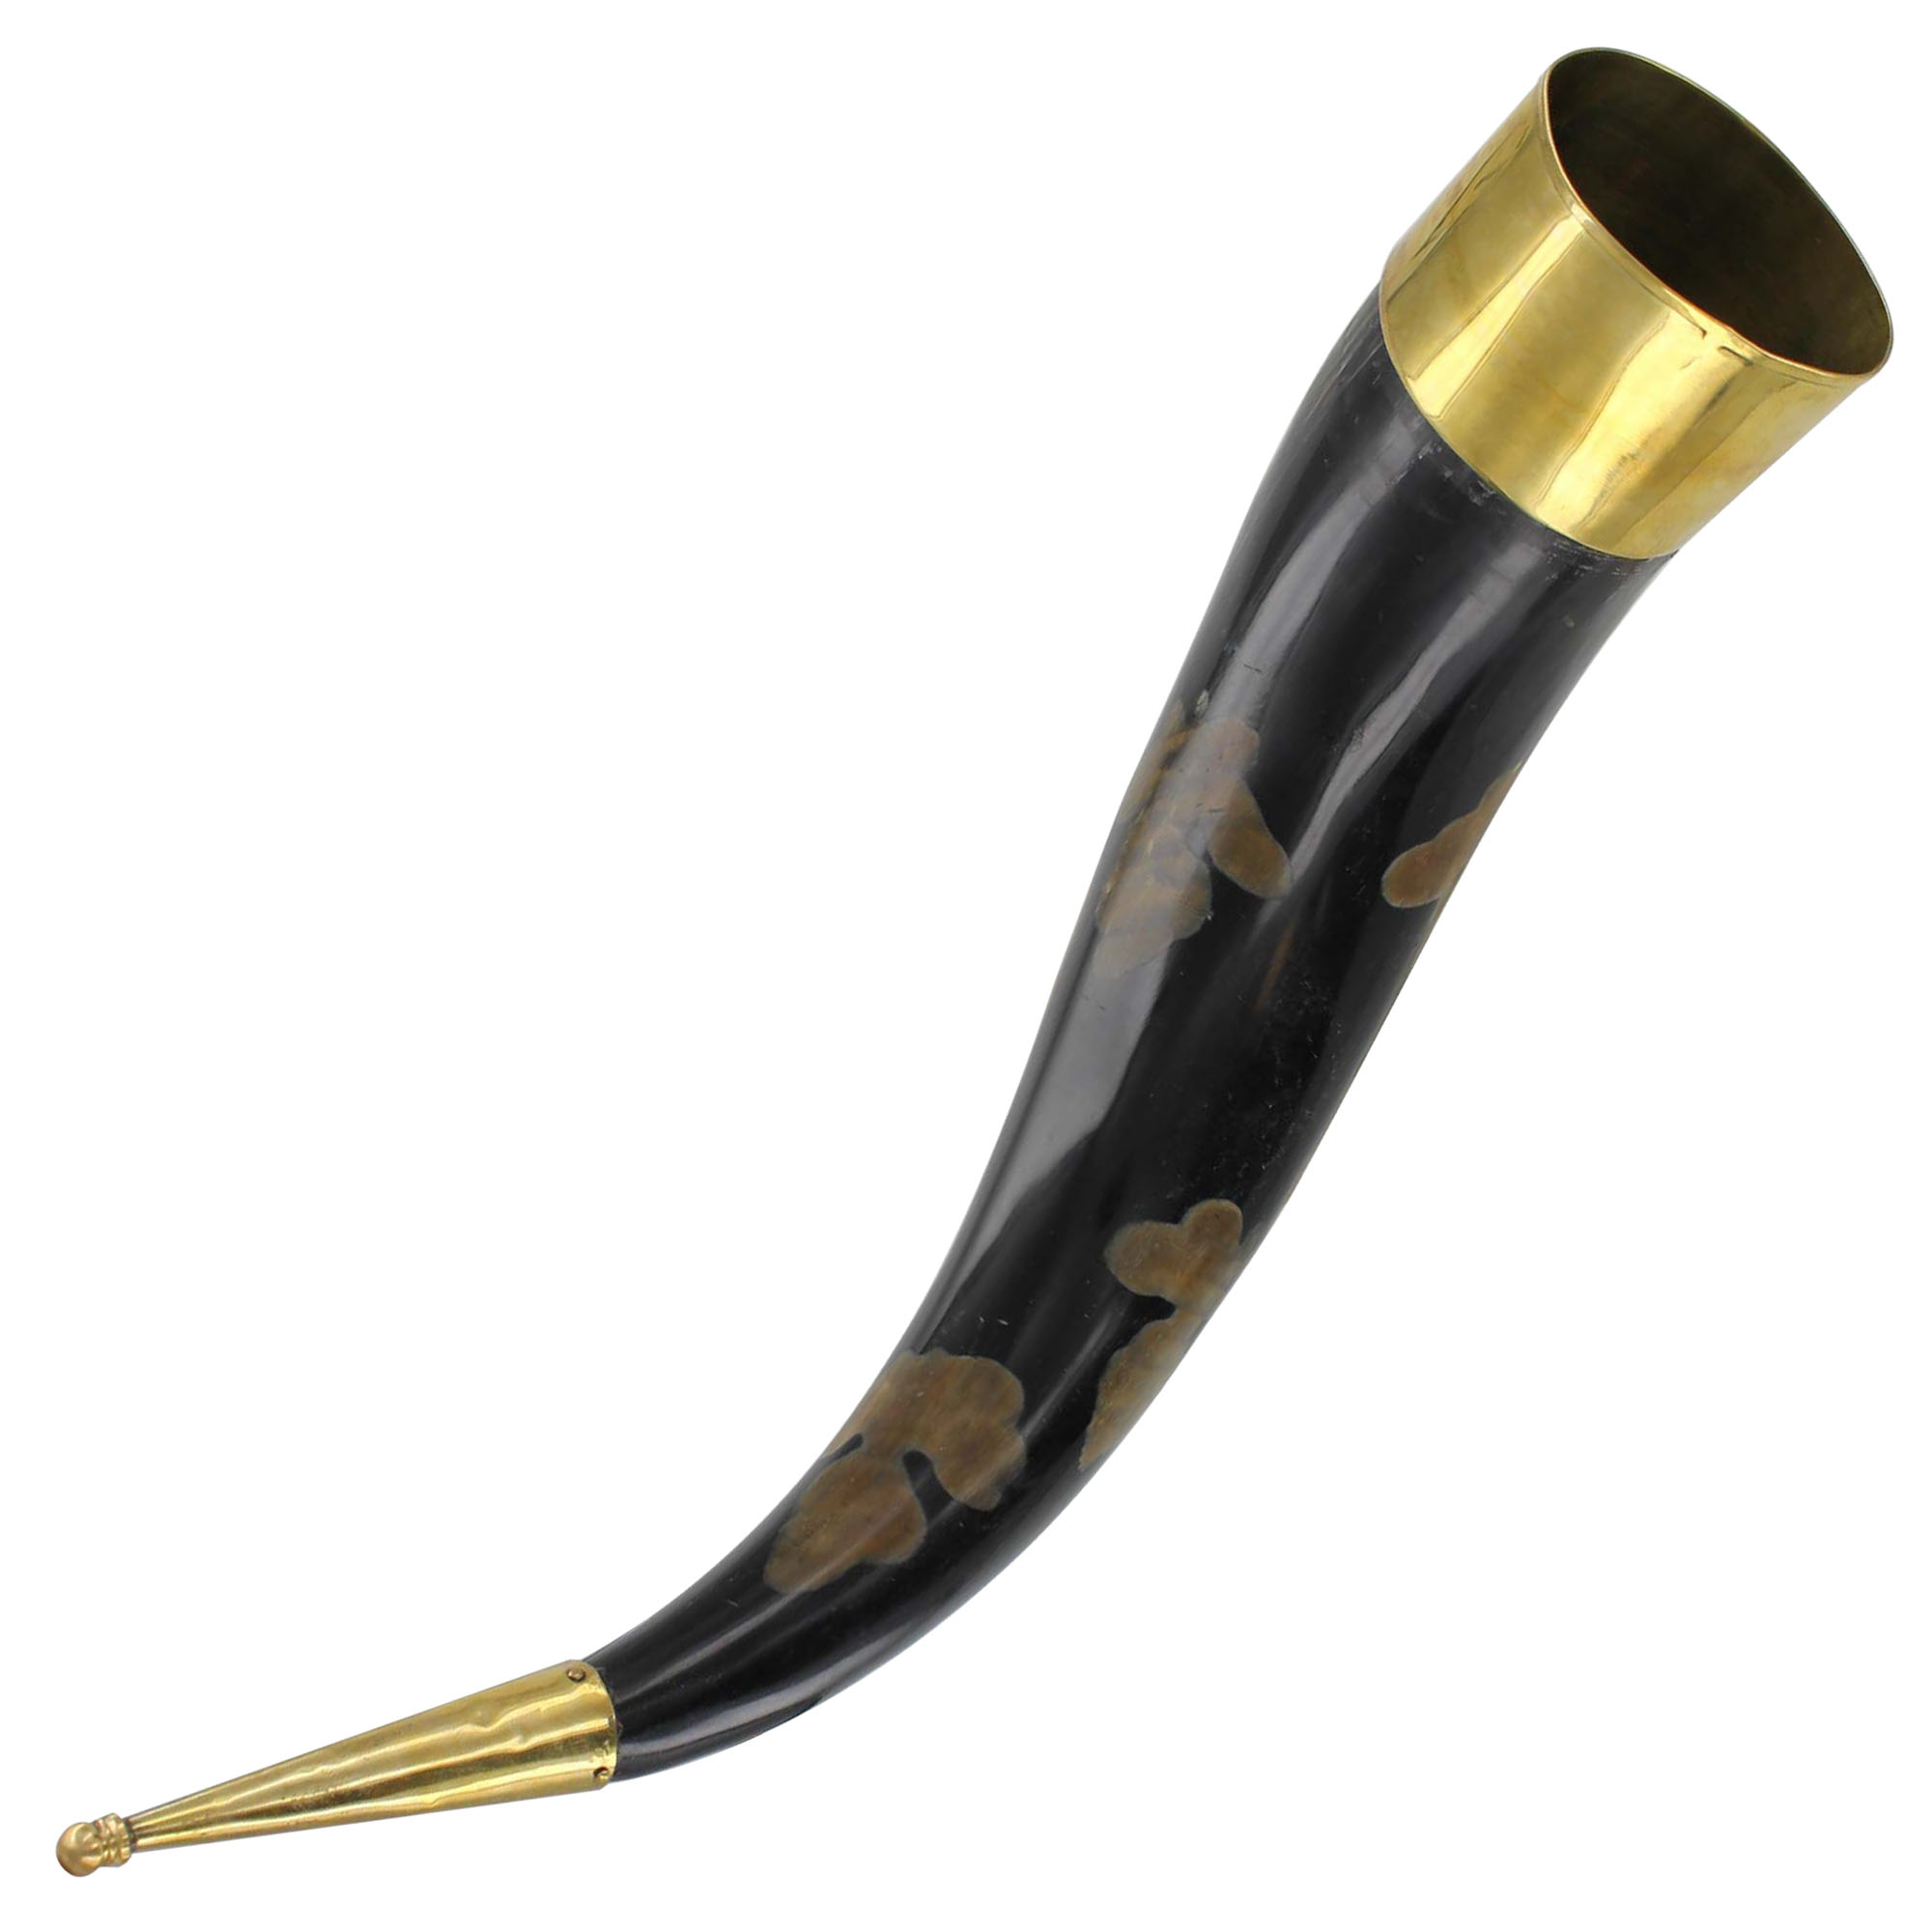 Horn of The Damned Medieval Drinking Horn with Pure Brass Details